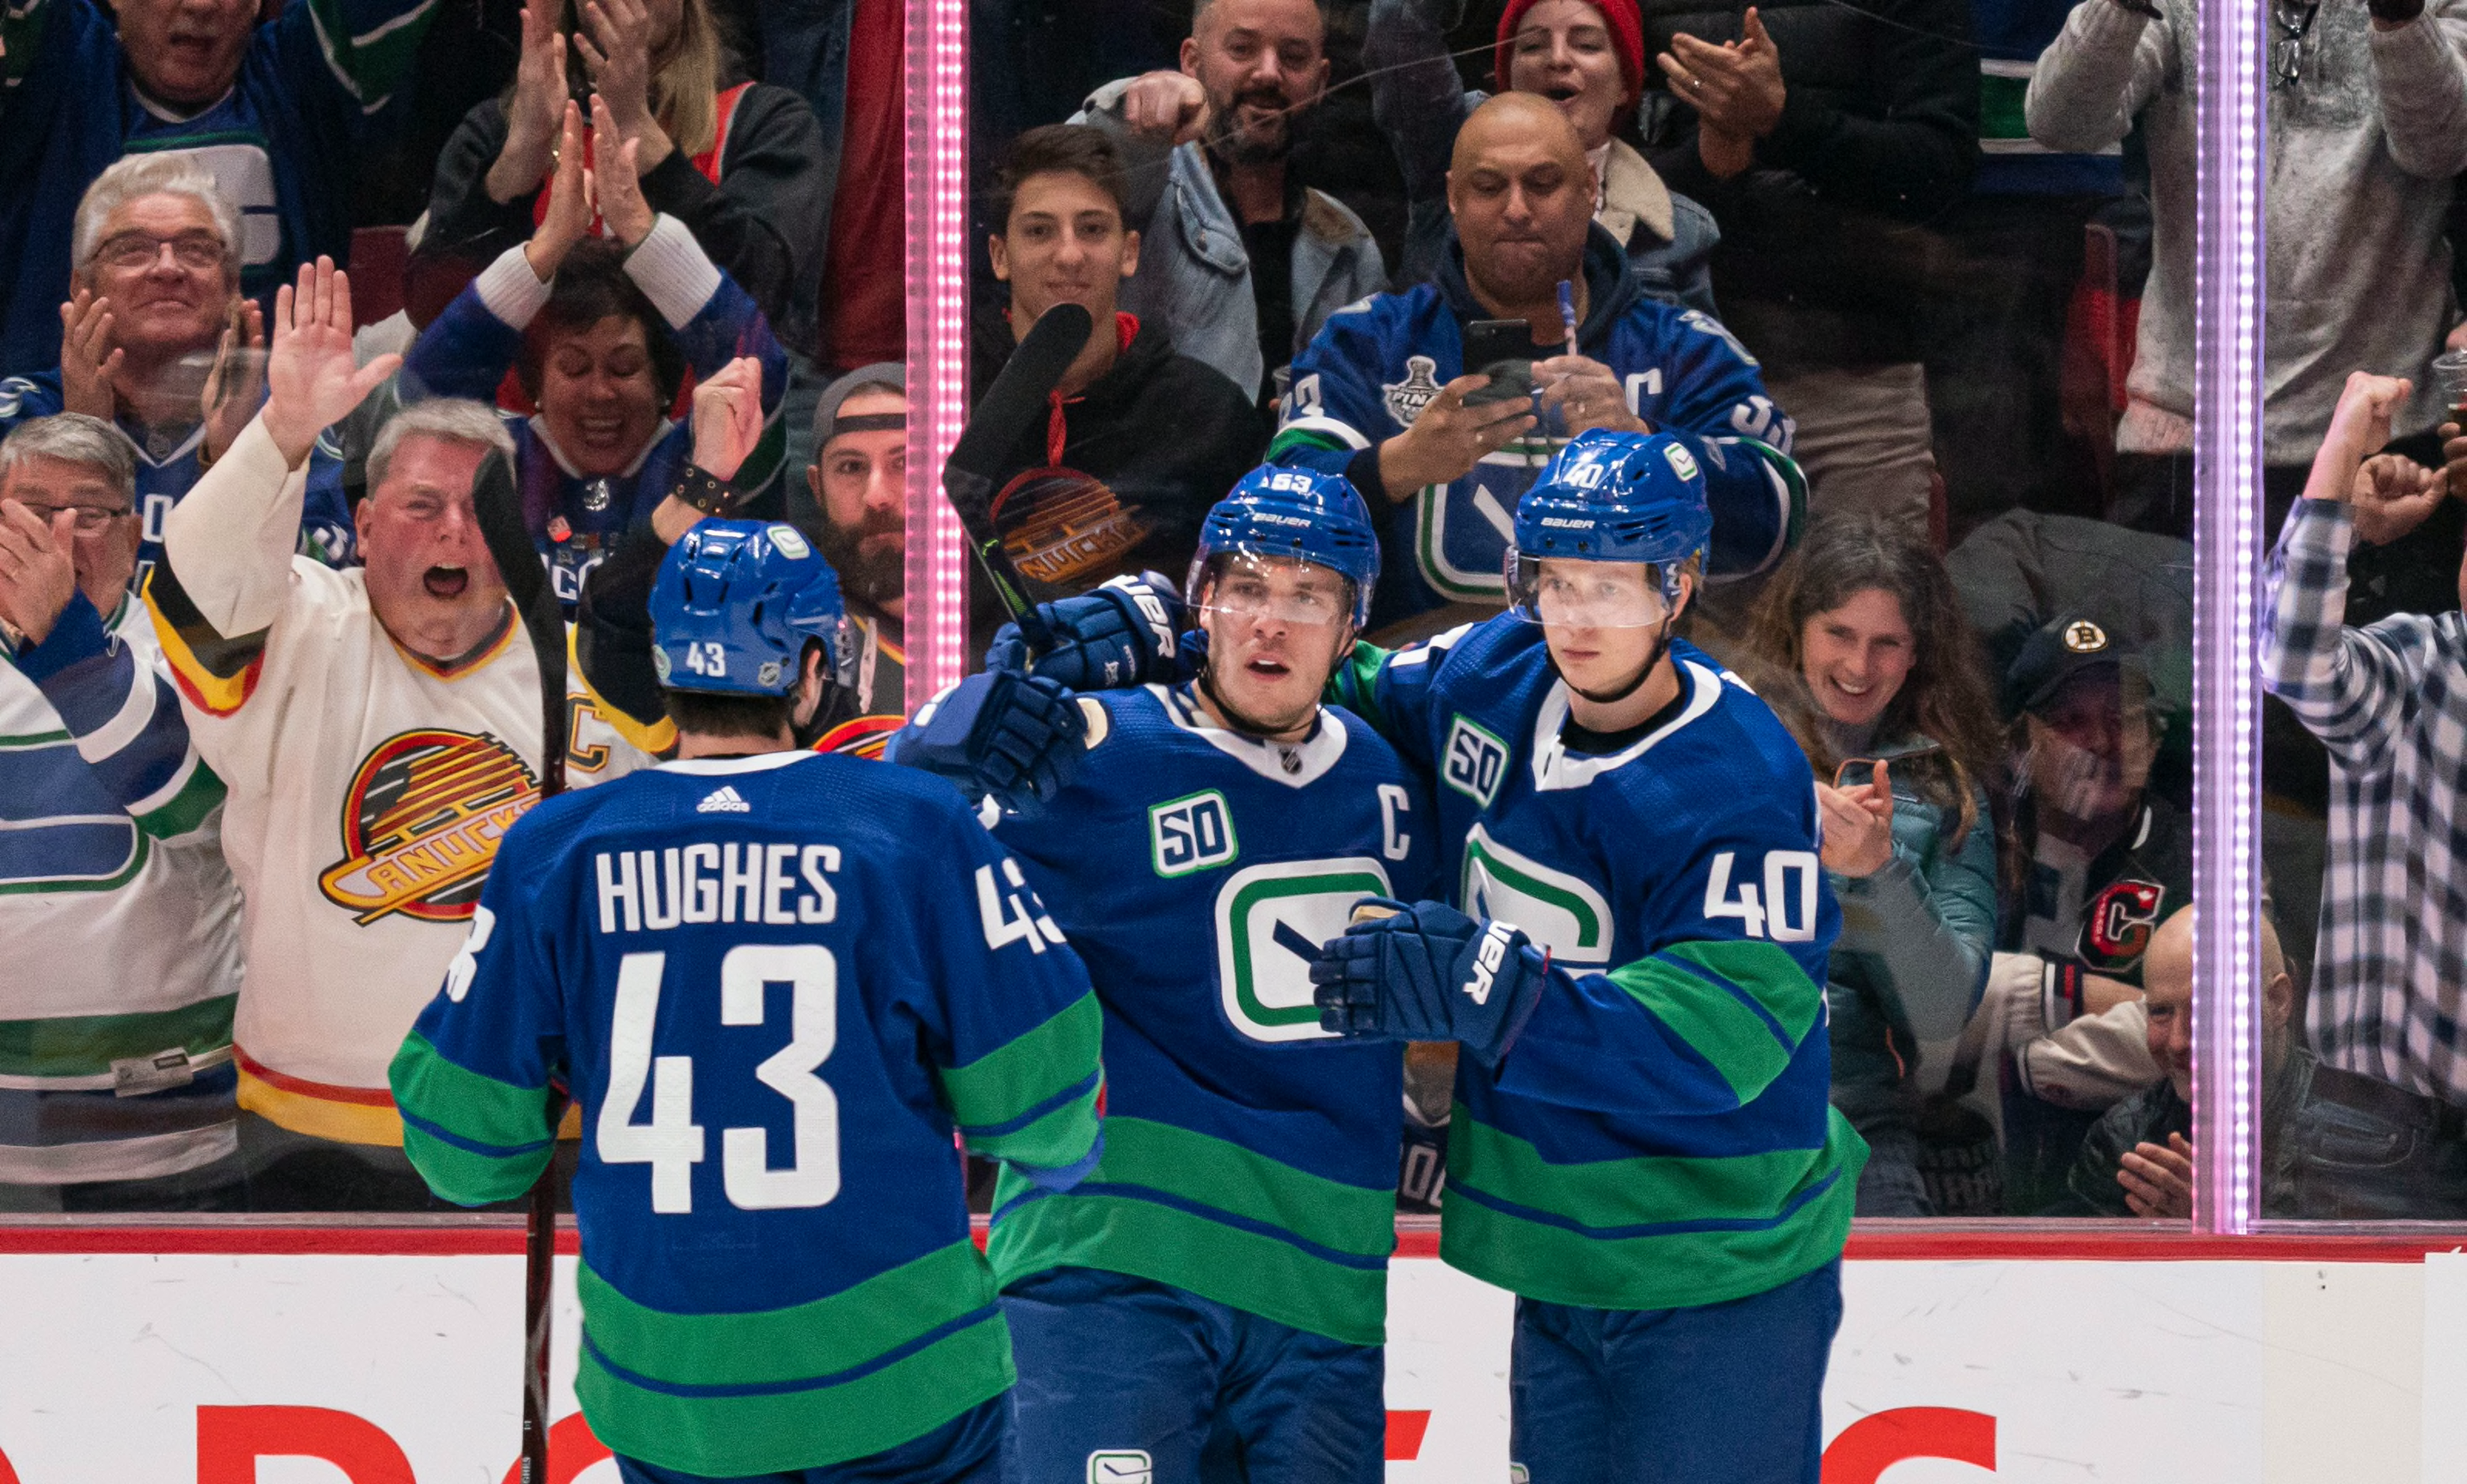 Canucks The 5 best games to rewatch from the 2019-20 season